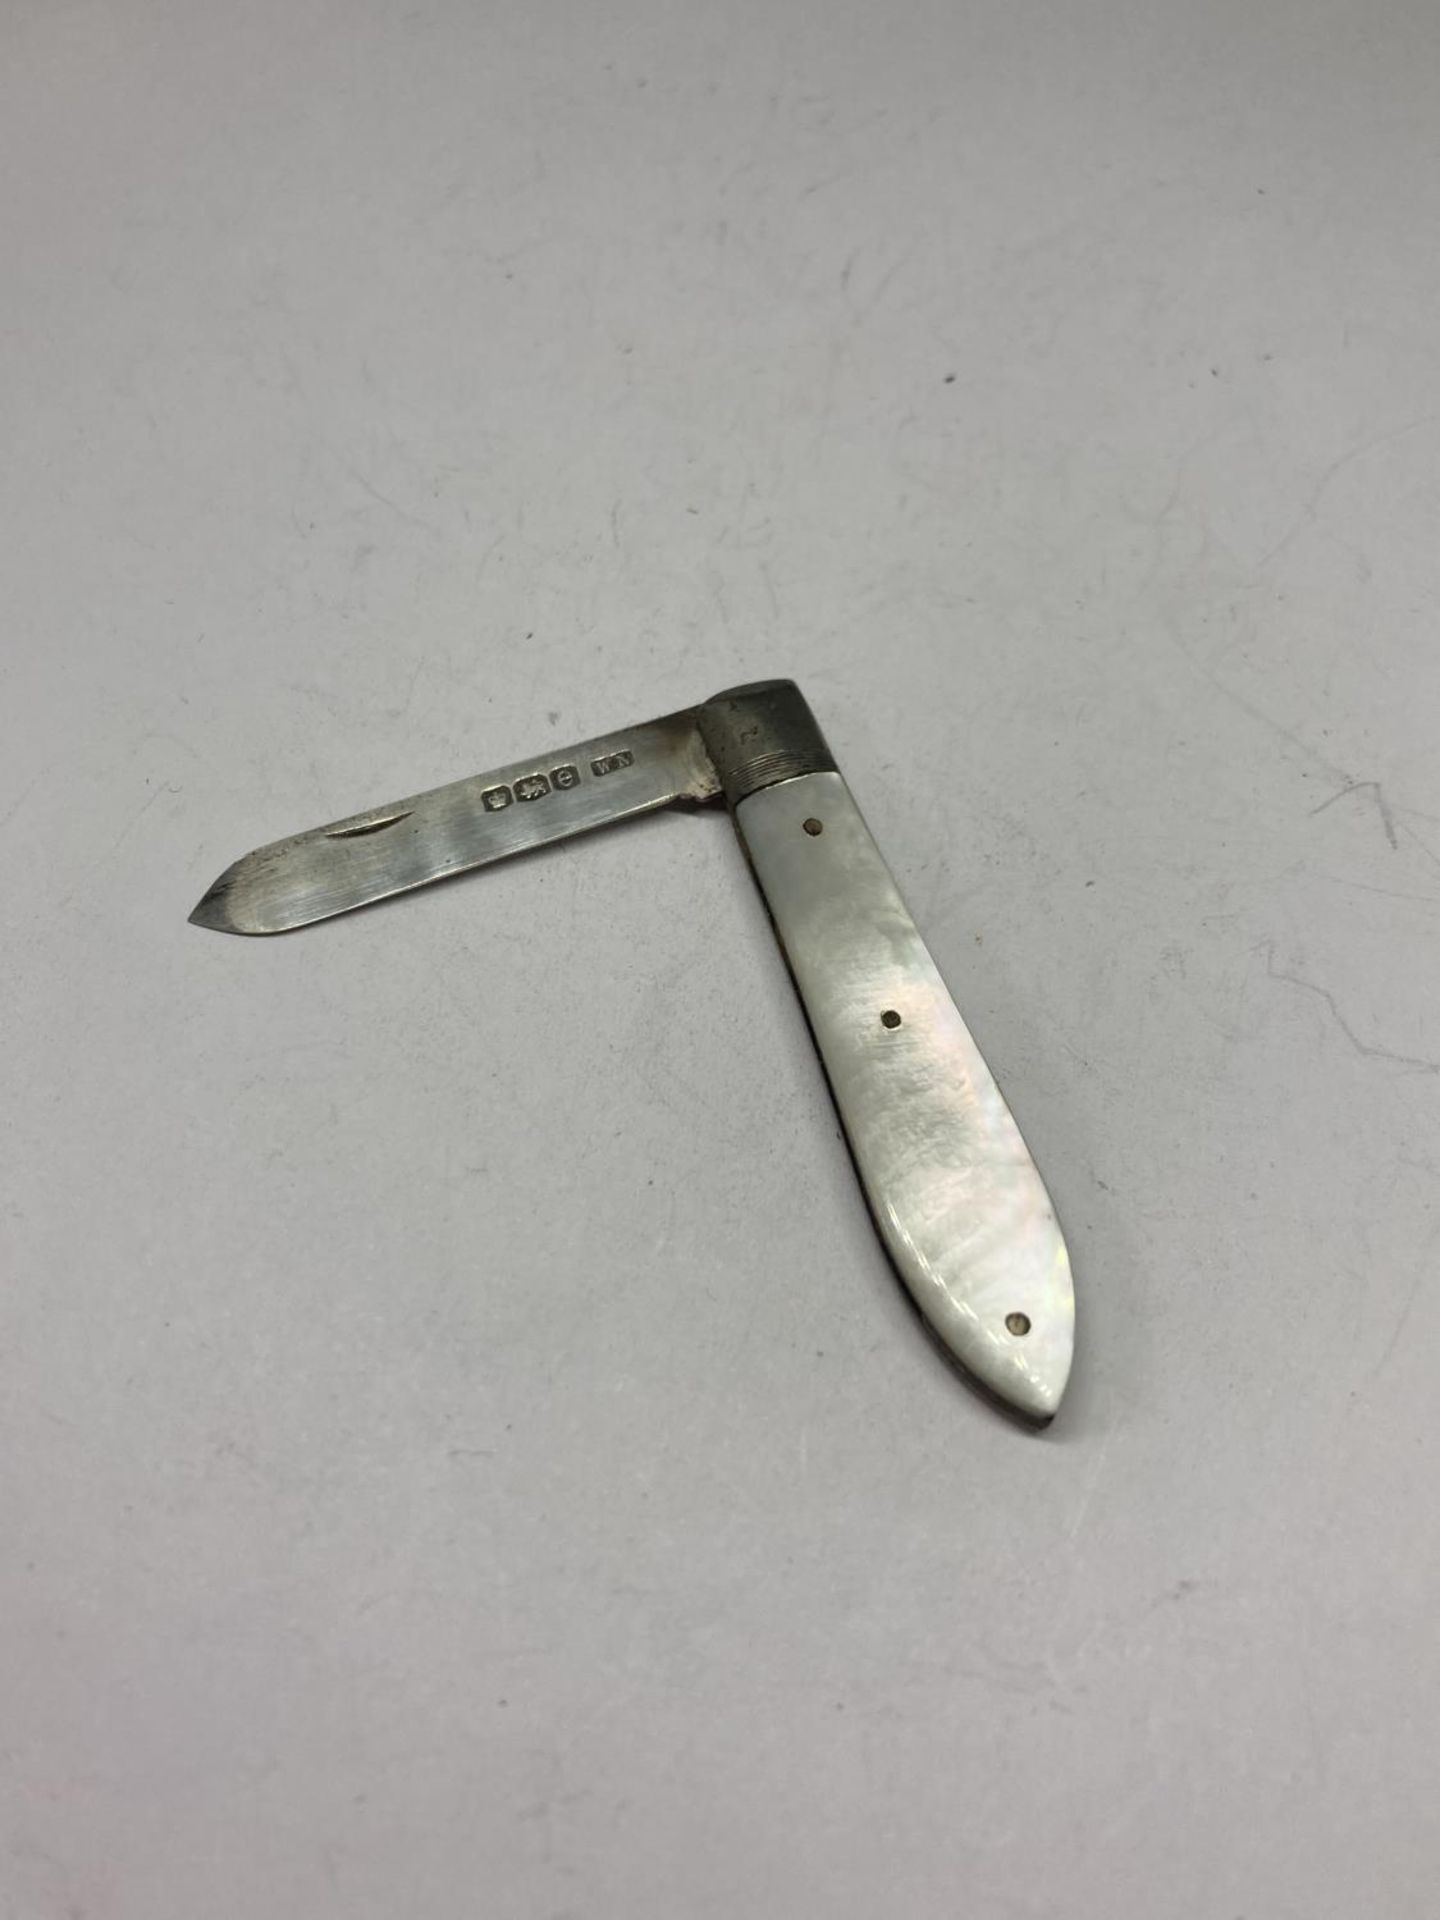 A HALLMARKED SHEFFIELD SILVER FRUIT KNIFE WITH MOTHER OF PEARL HANDLE